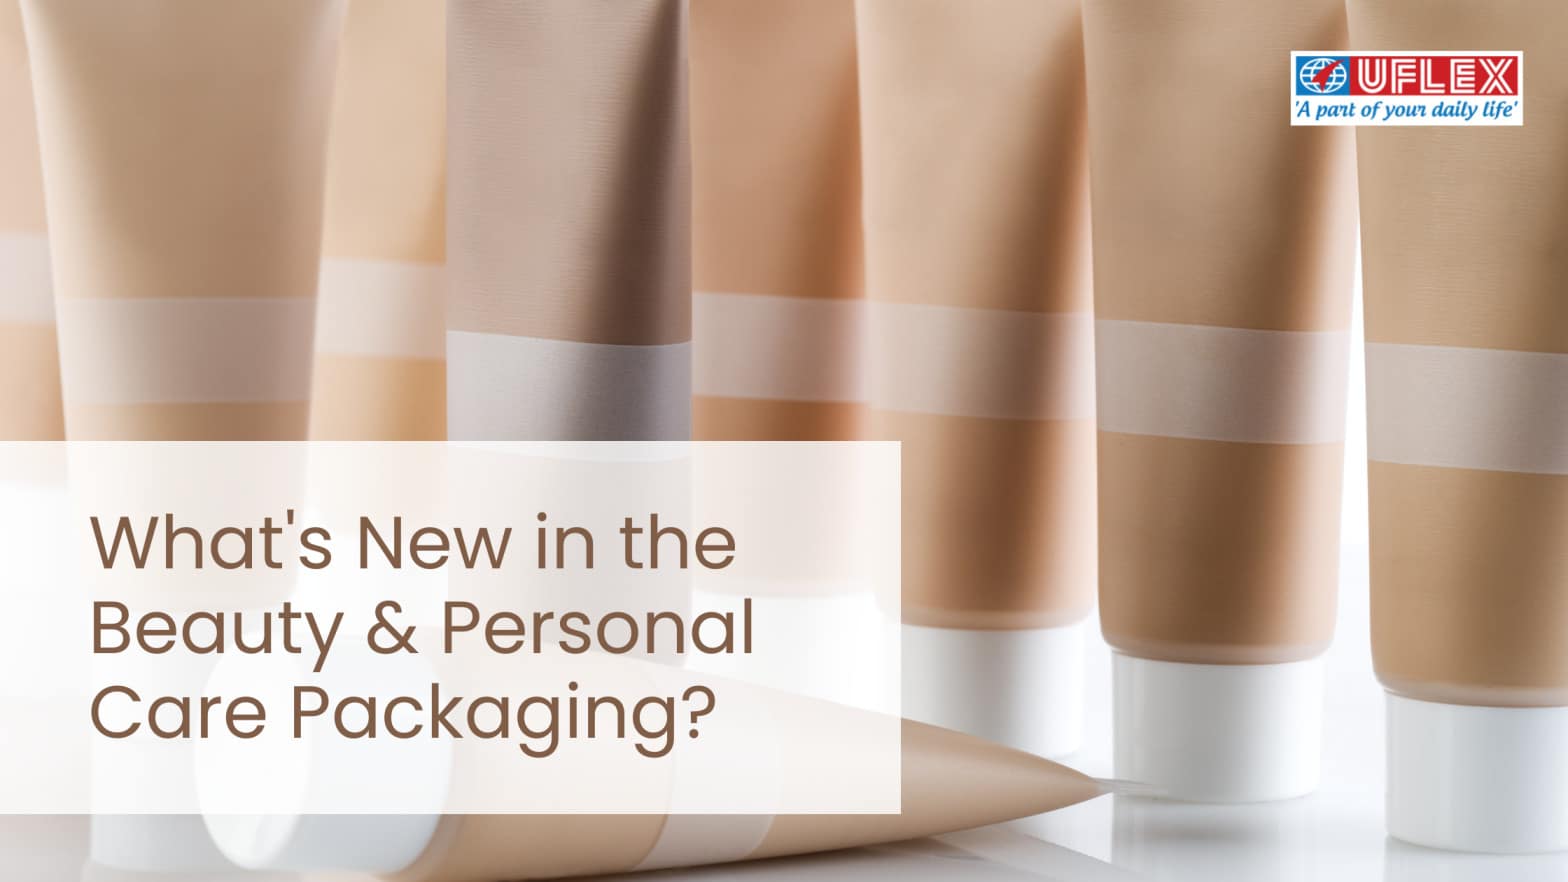 What’s Trending In Beauty And Personal Care Packaging?